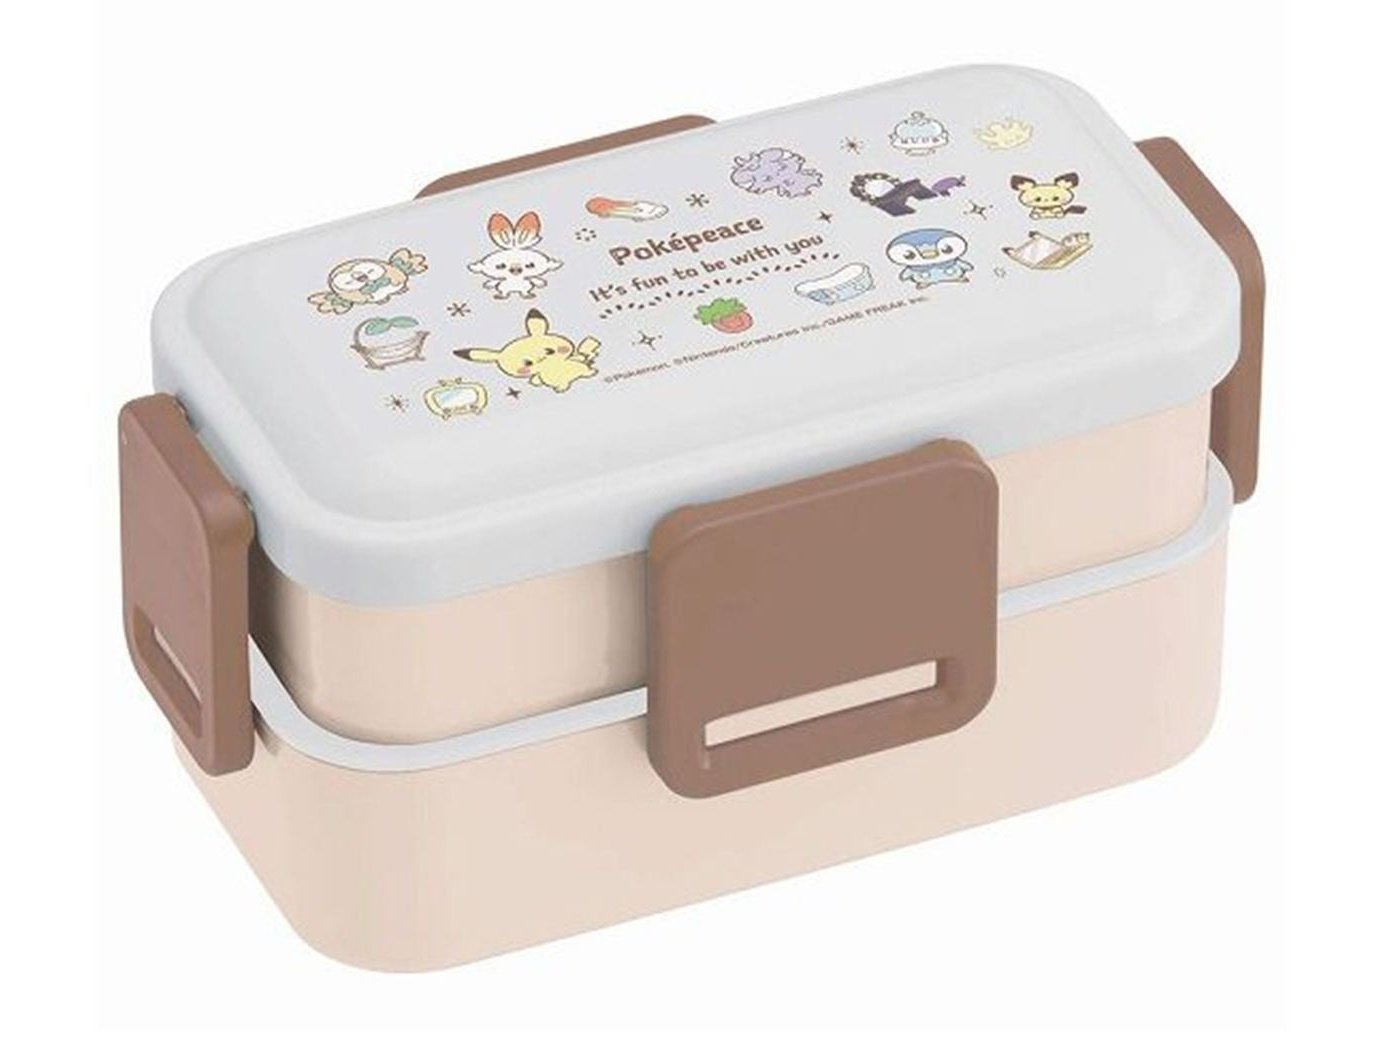 Skater Pokemon Peaceful Place 2 Tier Lunch Box 600ml